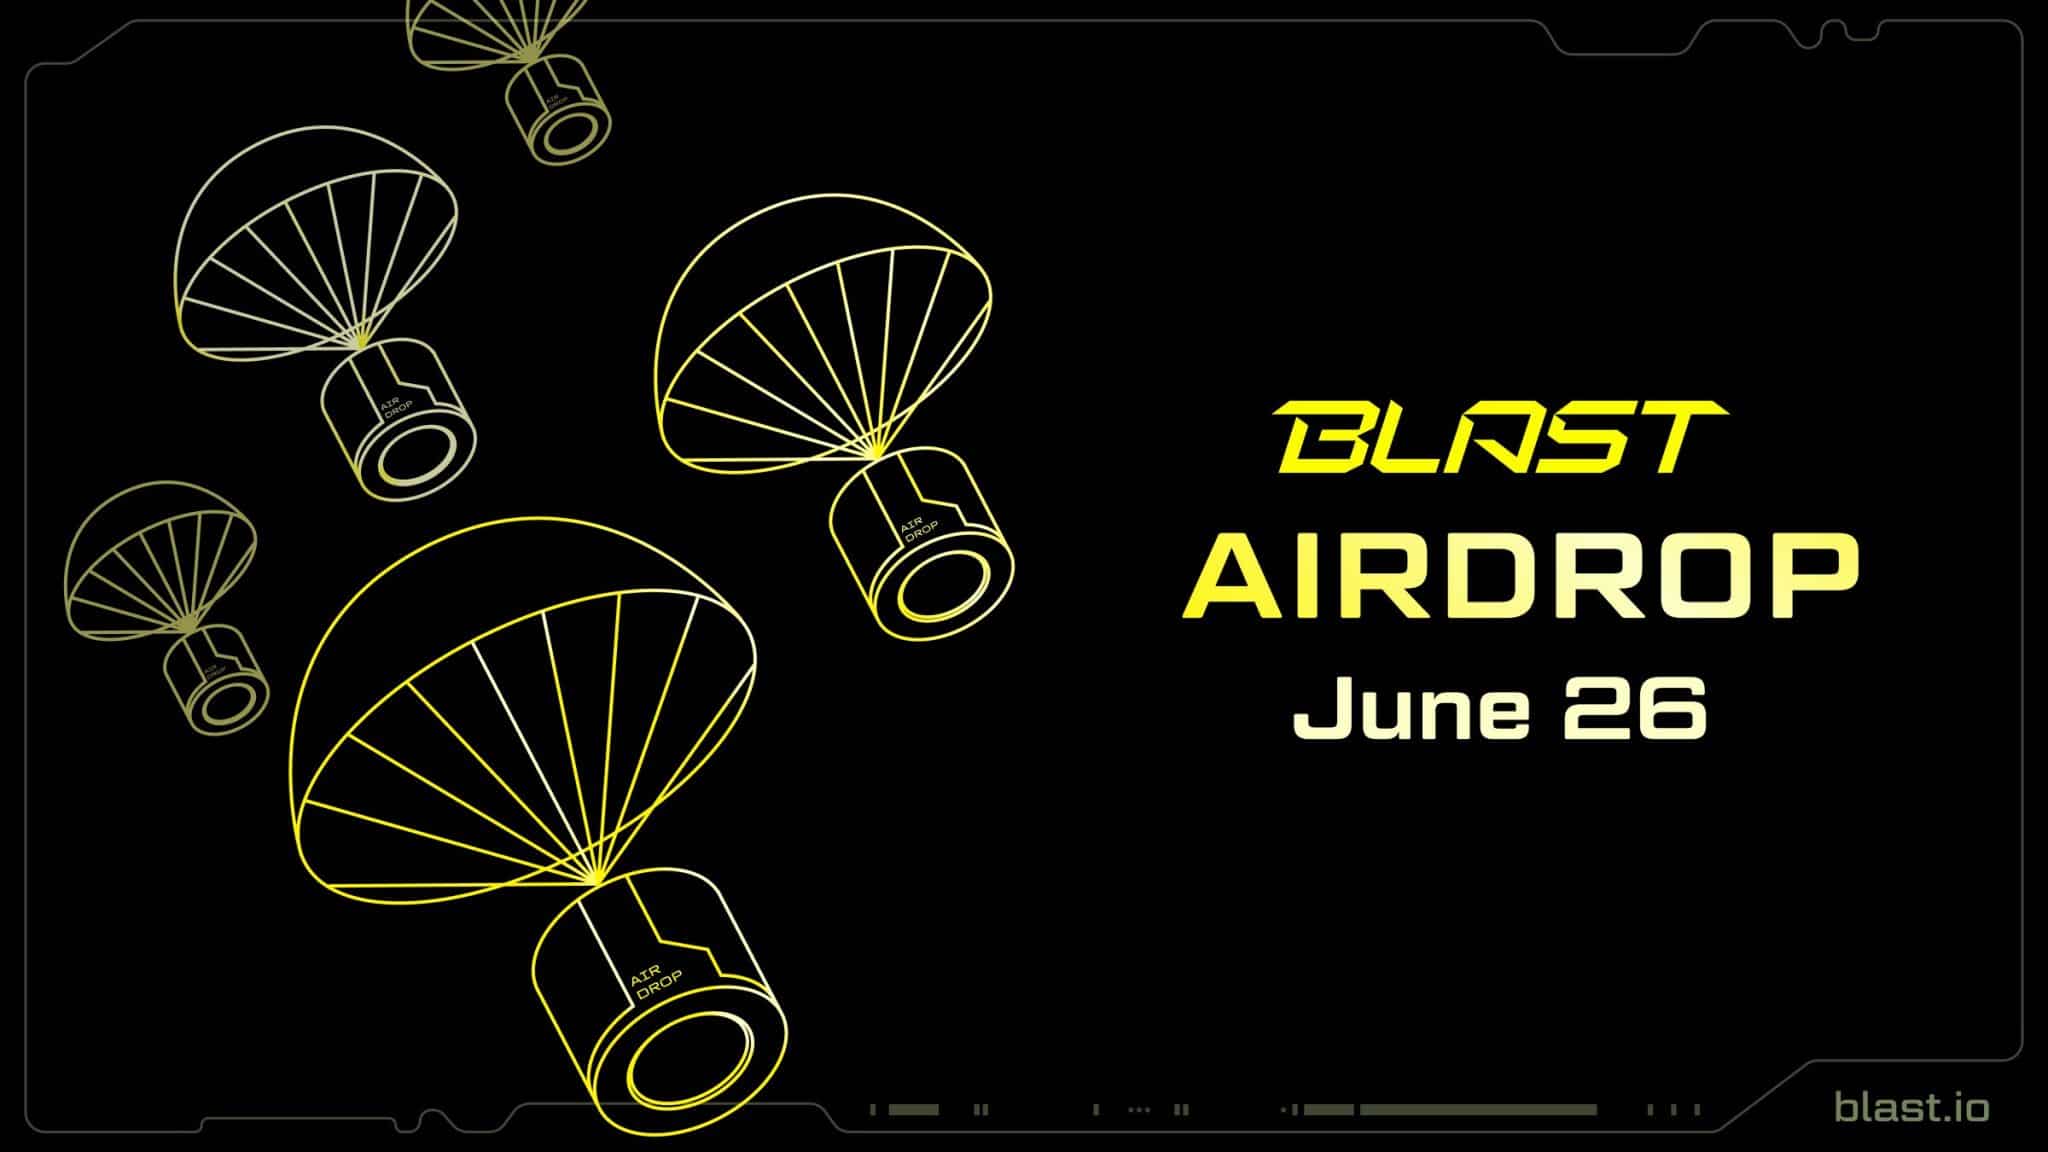 June 26 has been announced as the date for the Blast Airdrop with users hoping for a big bag to rival the vast Blur airdrop back in 2023.